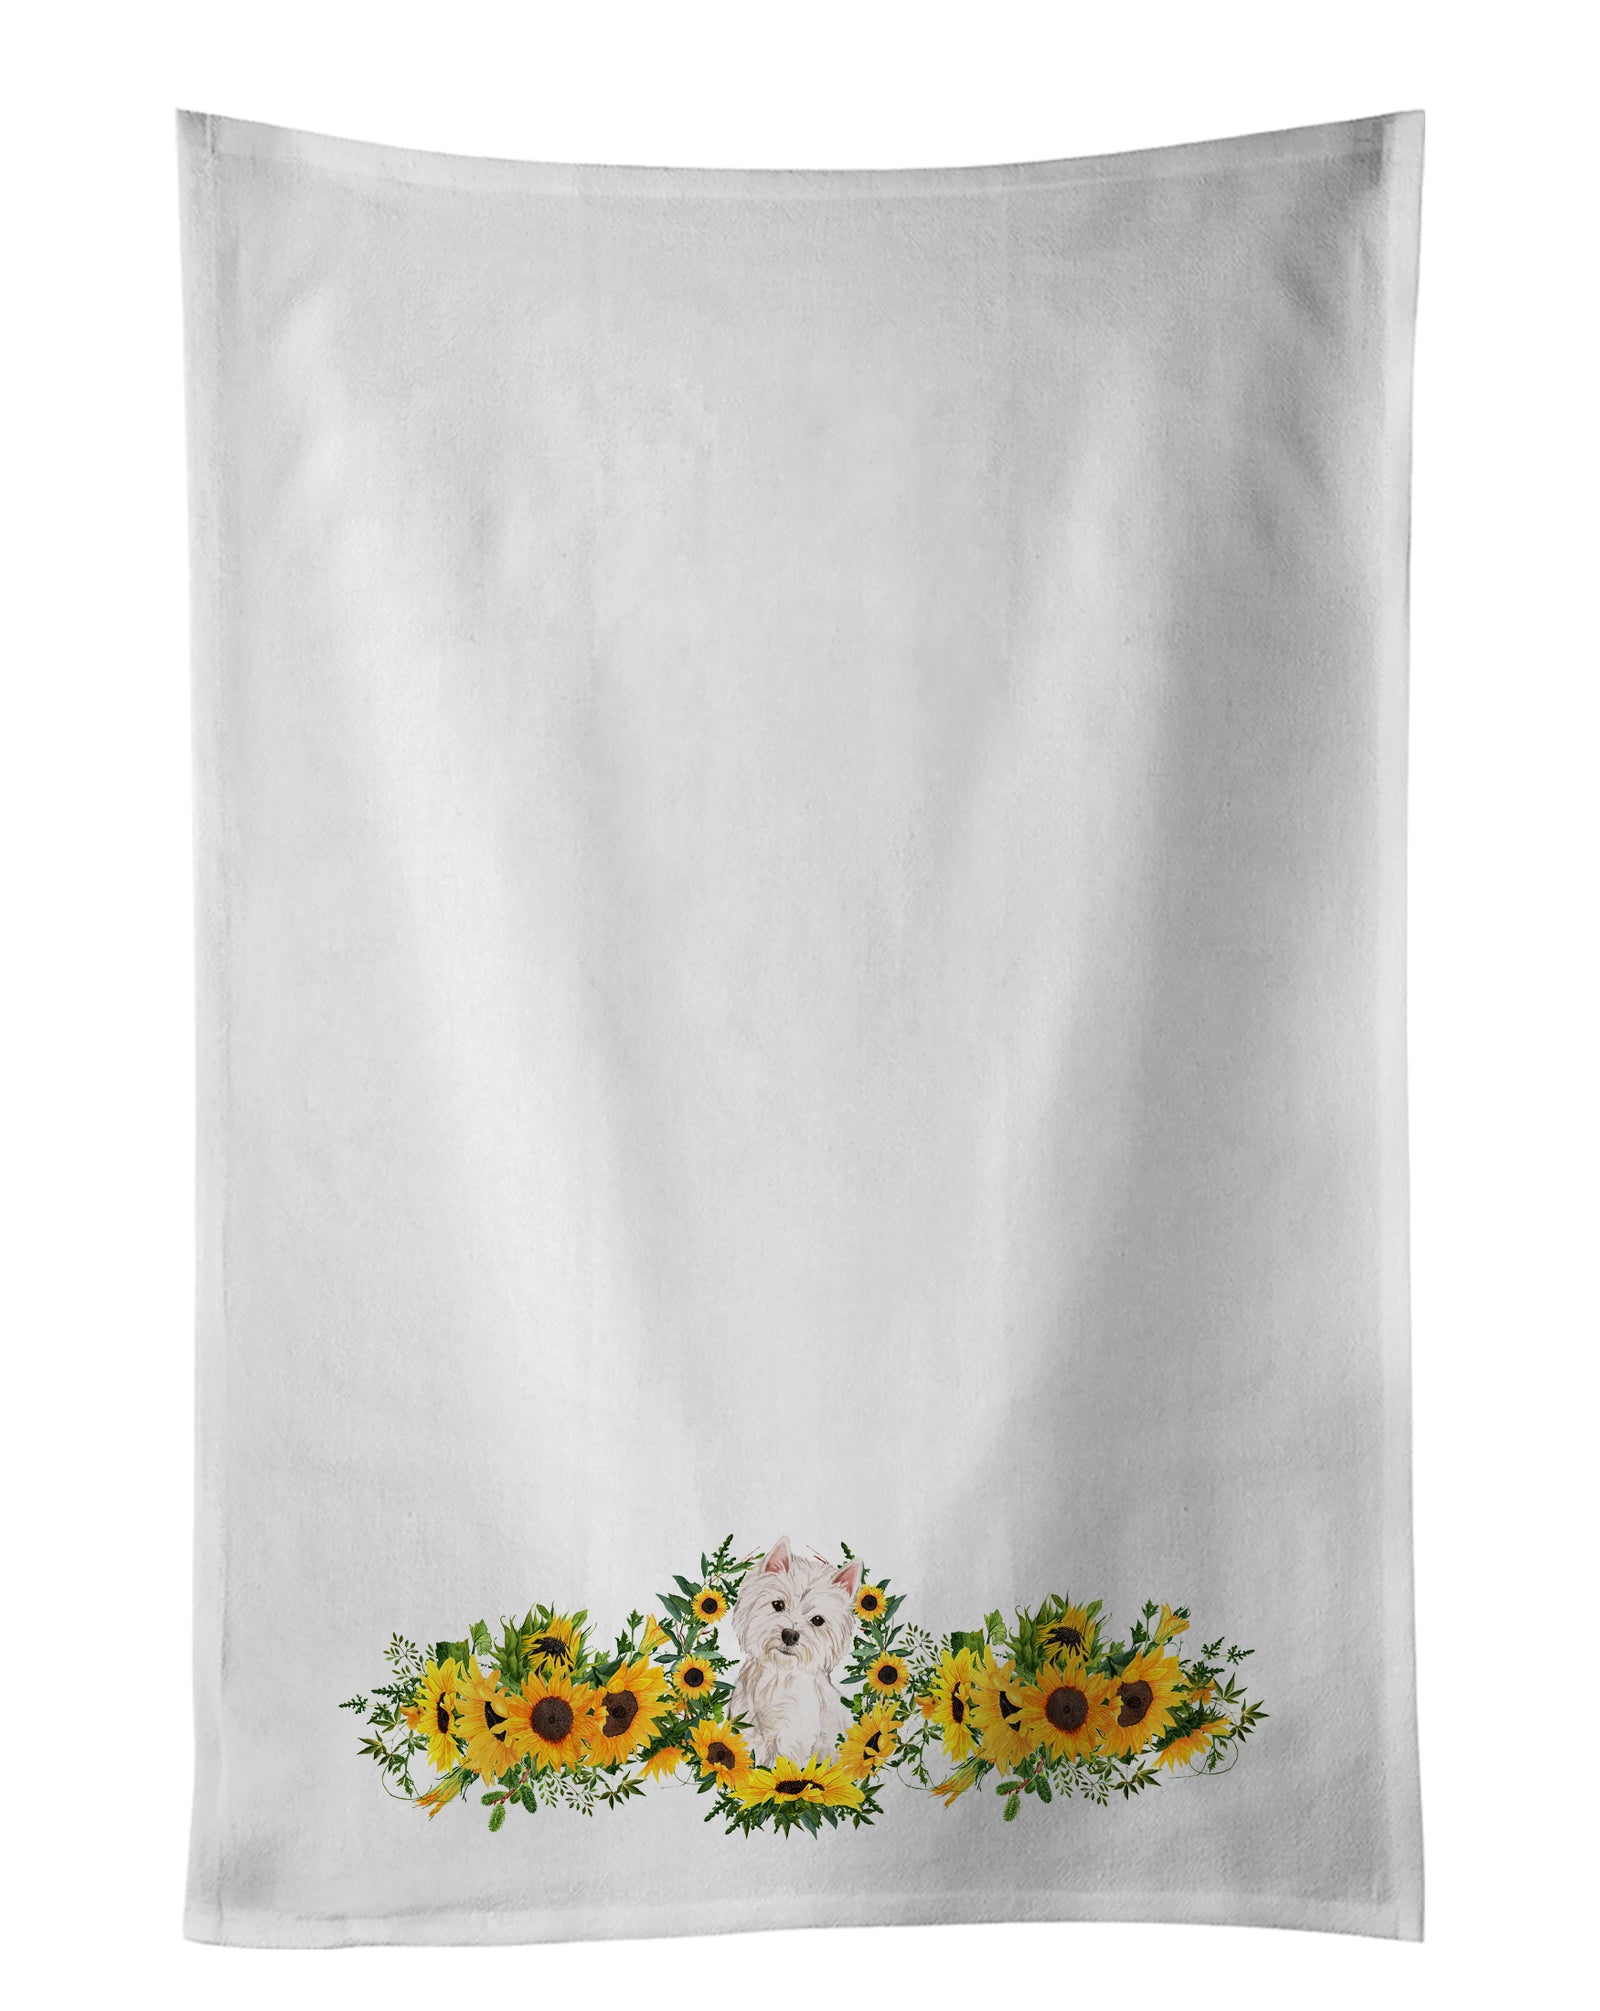 Buy this Westie in Sunflowers White Kitchen Towel Set of 2